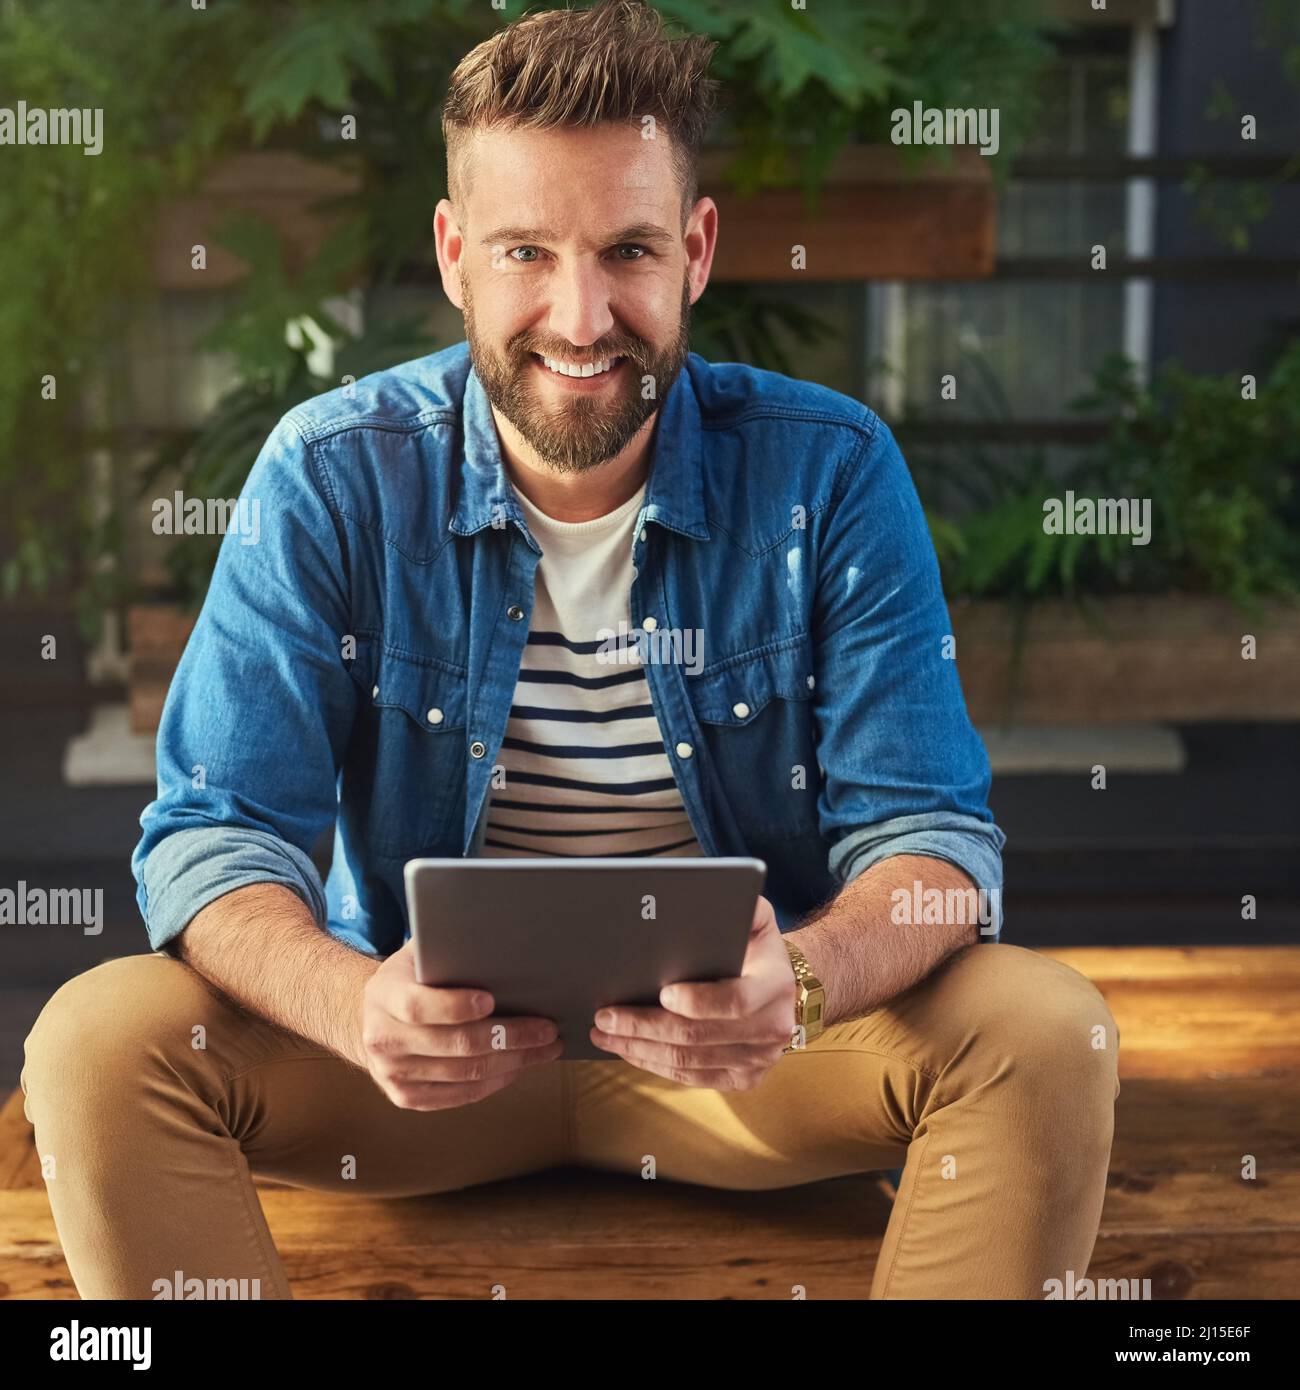 I cant survive without social media at my side. Portrait of a handsome young man using a digital tablet. Stock Photo